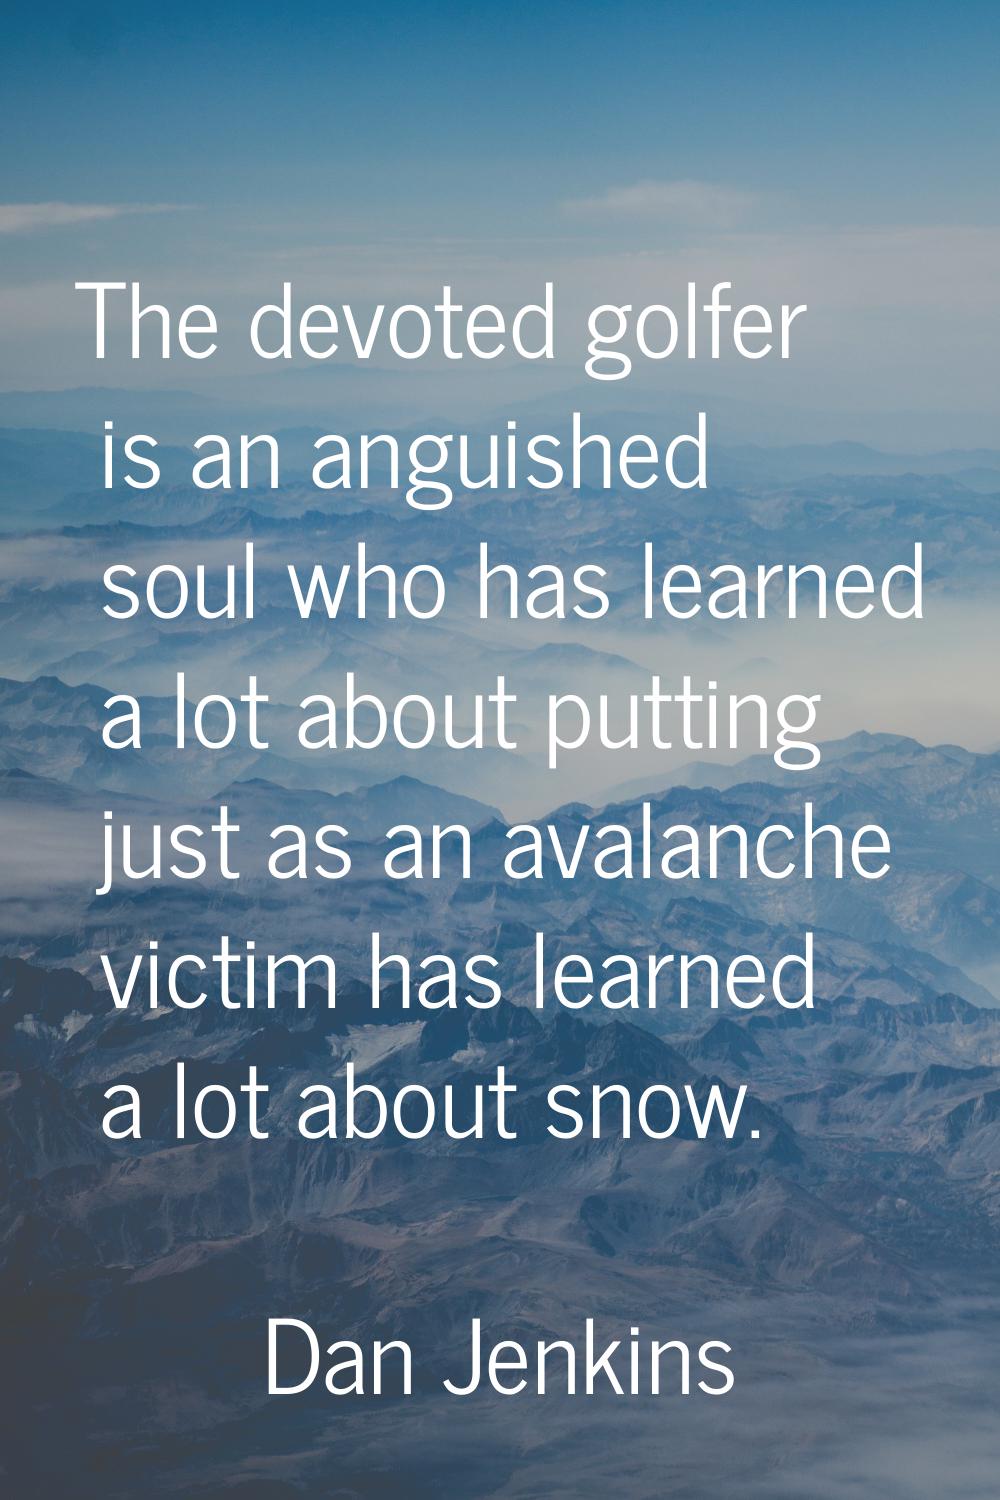 The devoted golfer is an anguished soul who has learned a lot about putting just as an avalanche vi